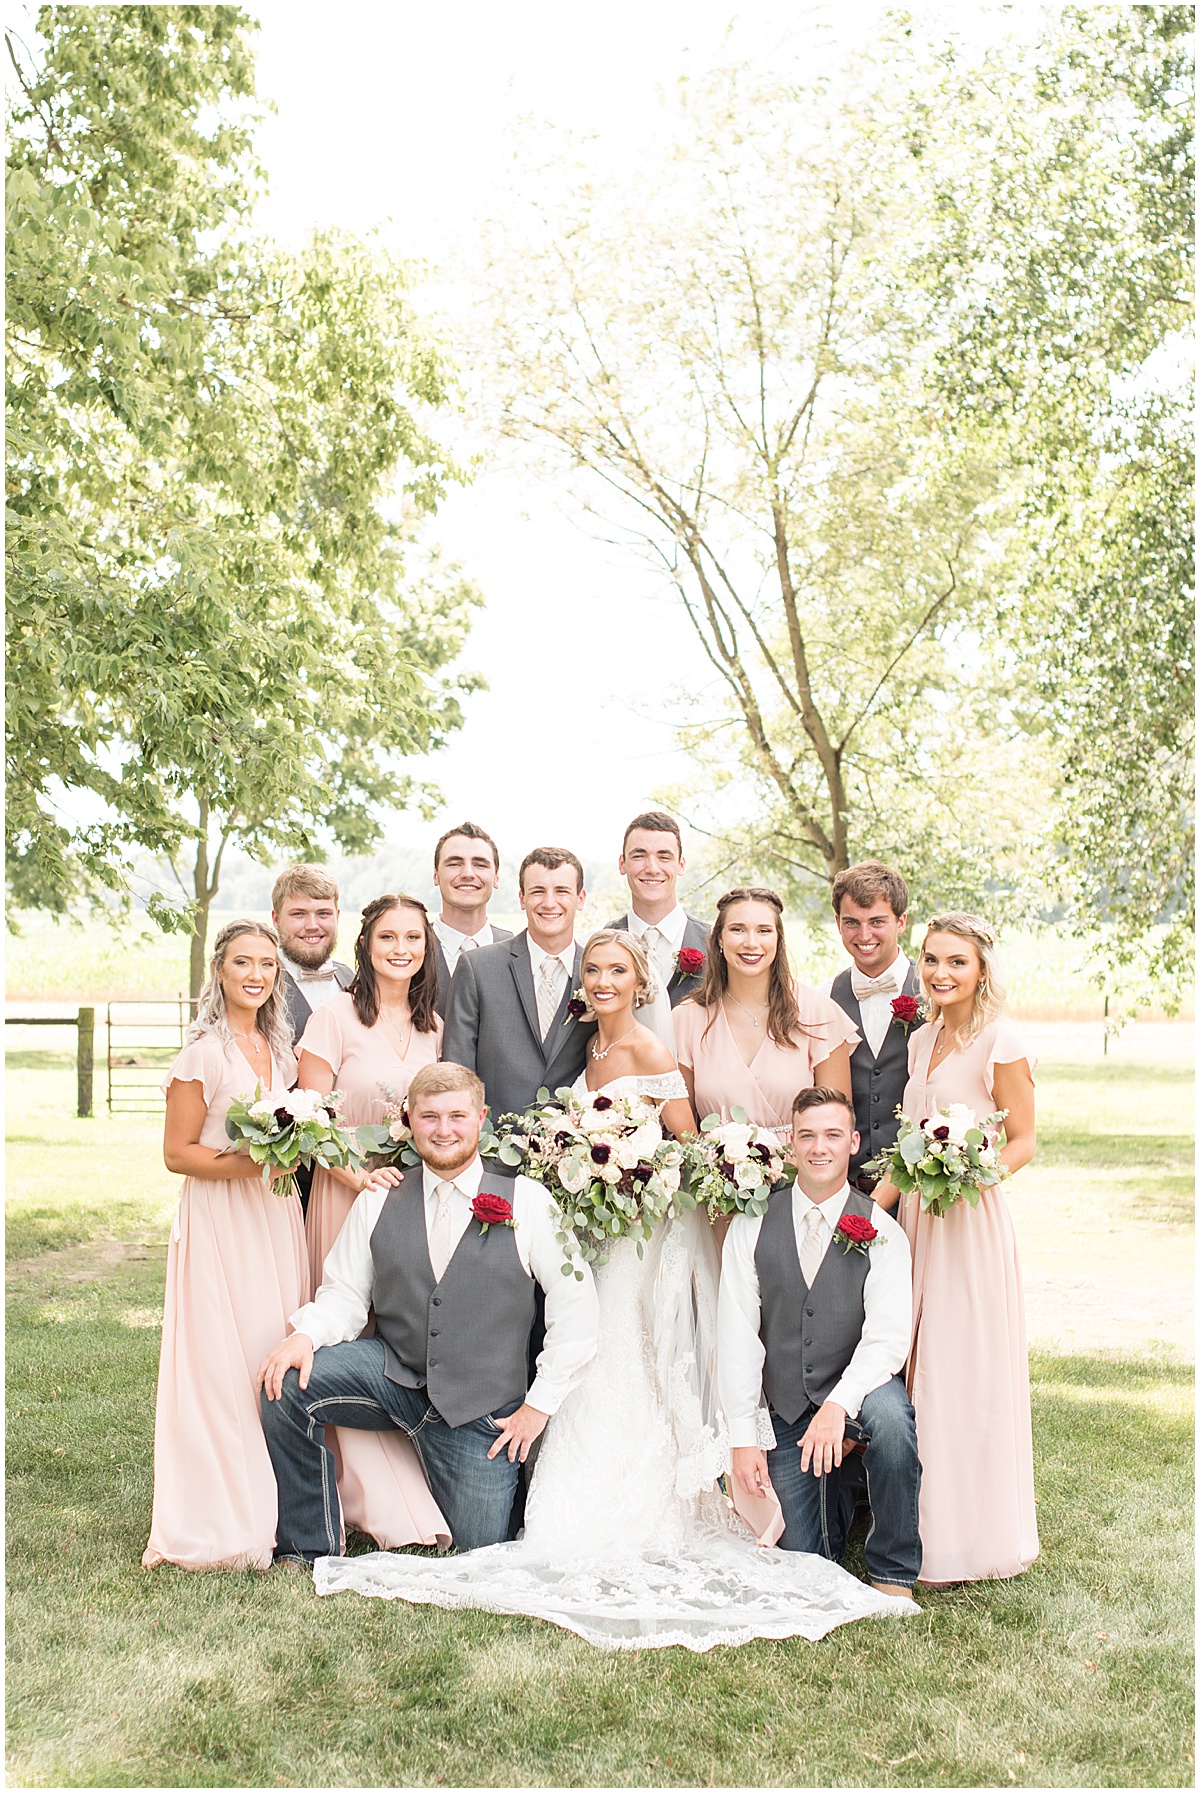 Bridal Party at Summer Wedding at Vintage Oaks Banquet Barn in Lafayette, Indiana